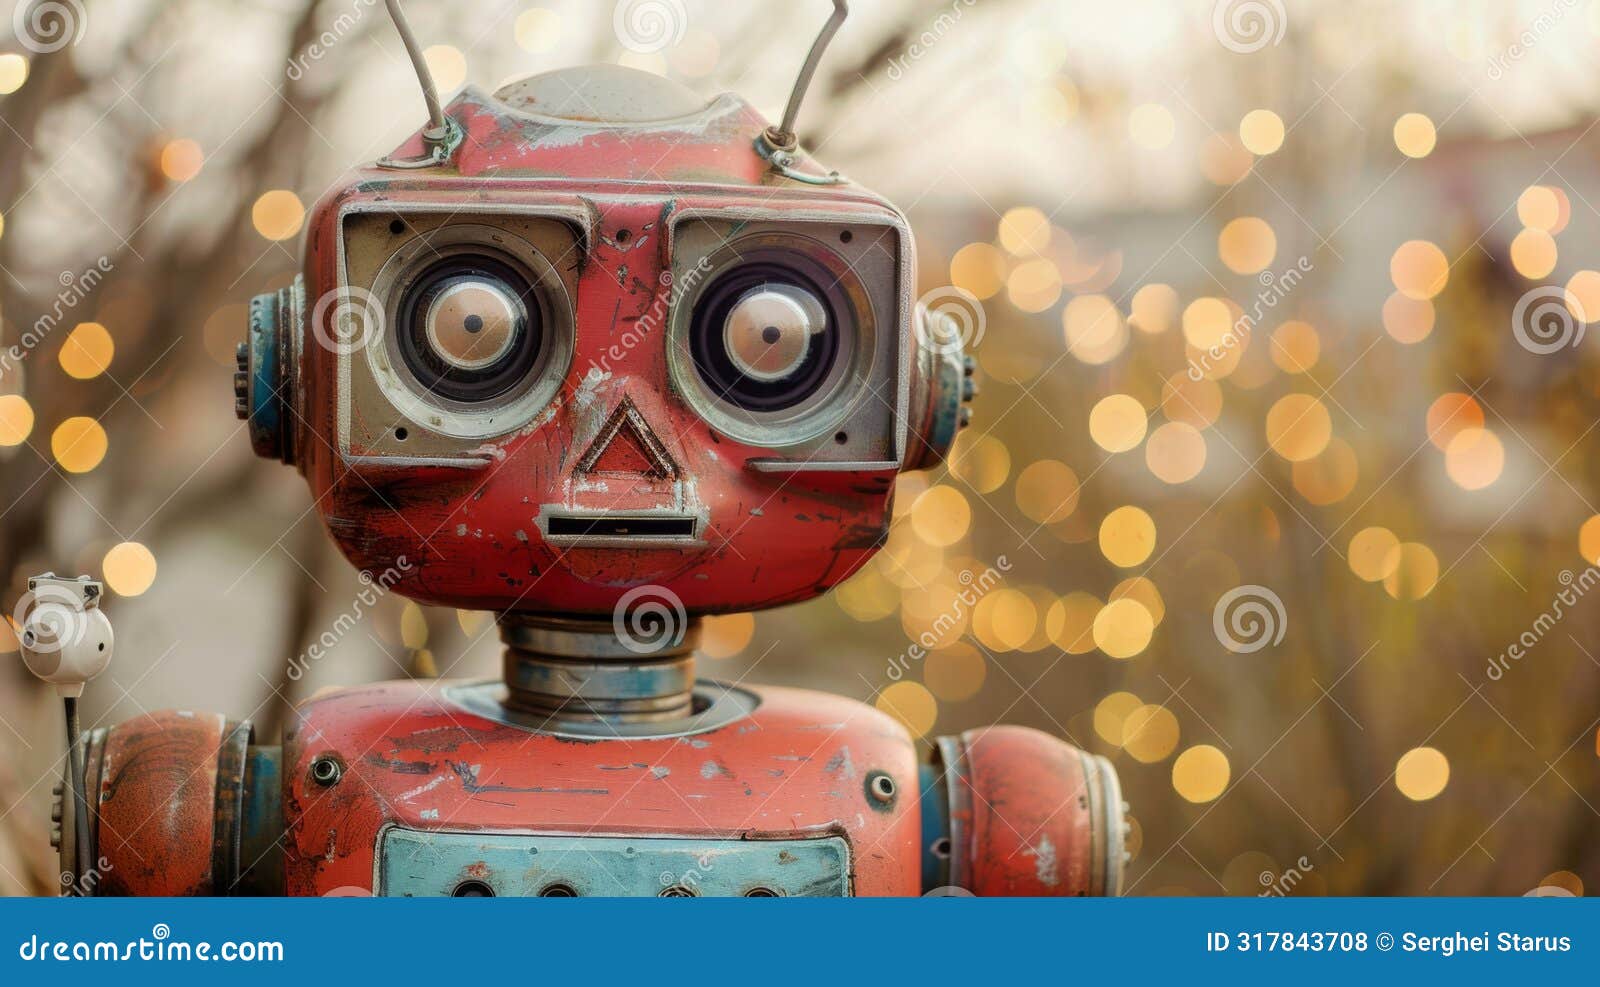 a red robot with a big eye and antennae standing in front of some lights, ai